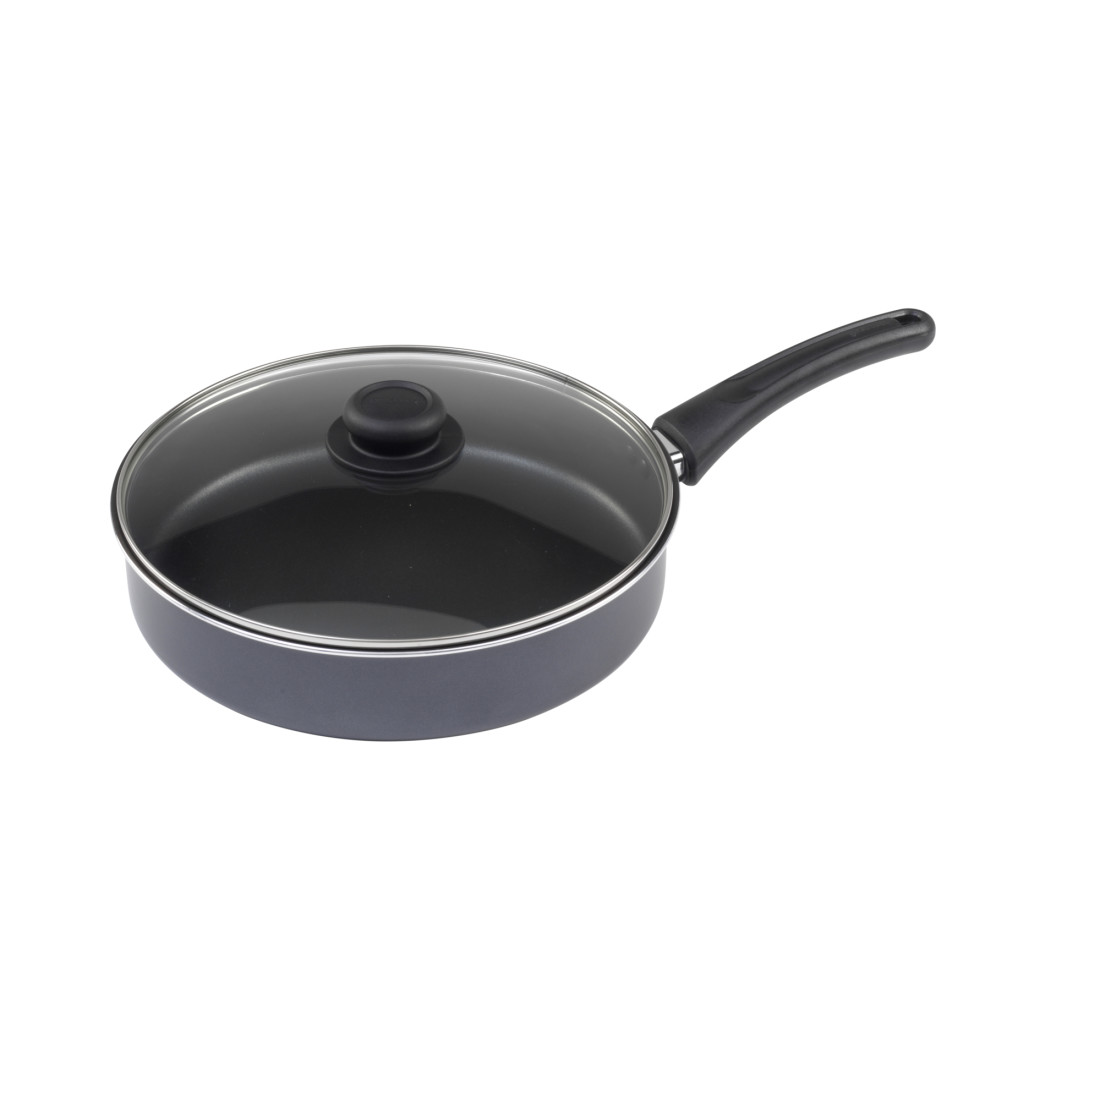 12-Inch Fry Pan w/Lid / Nonstick / SD5 - Second Quality